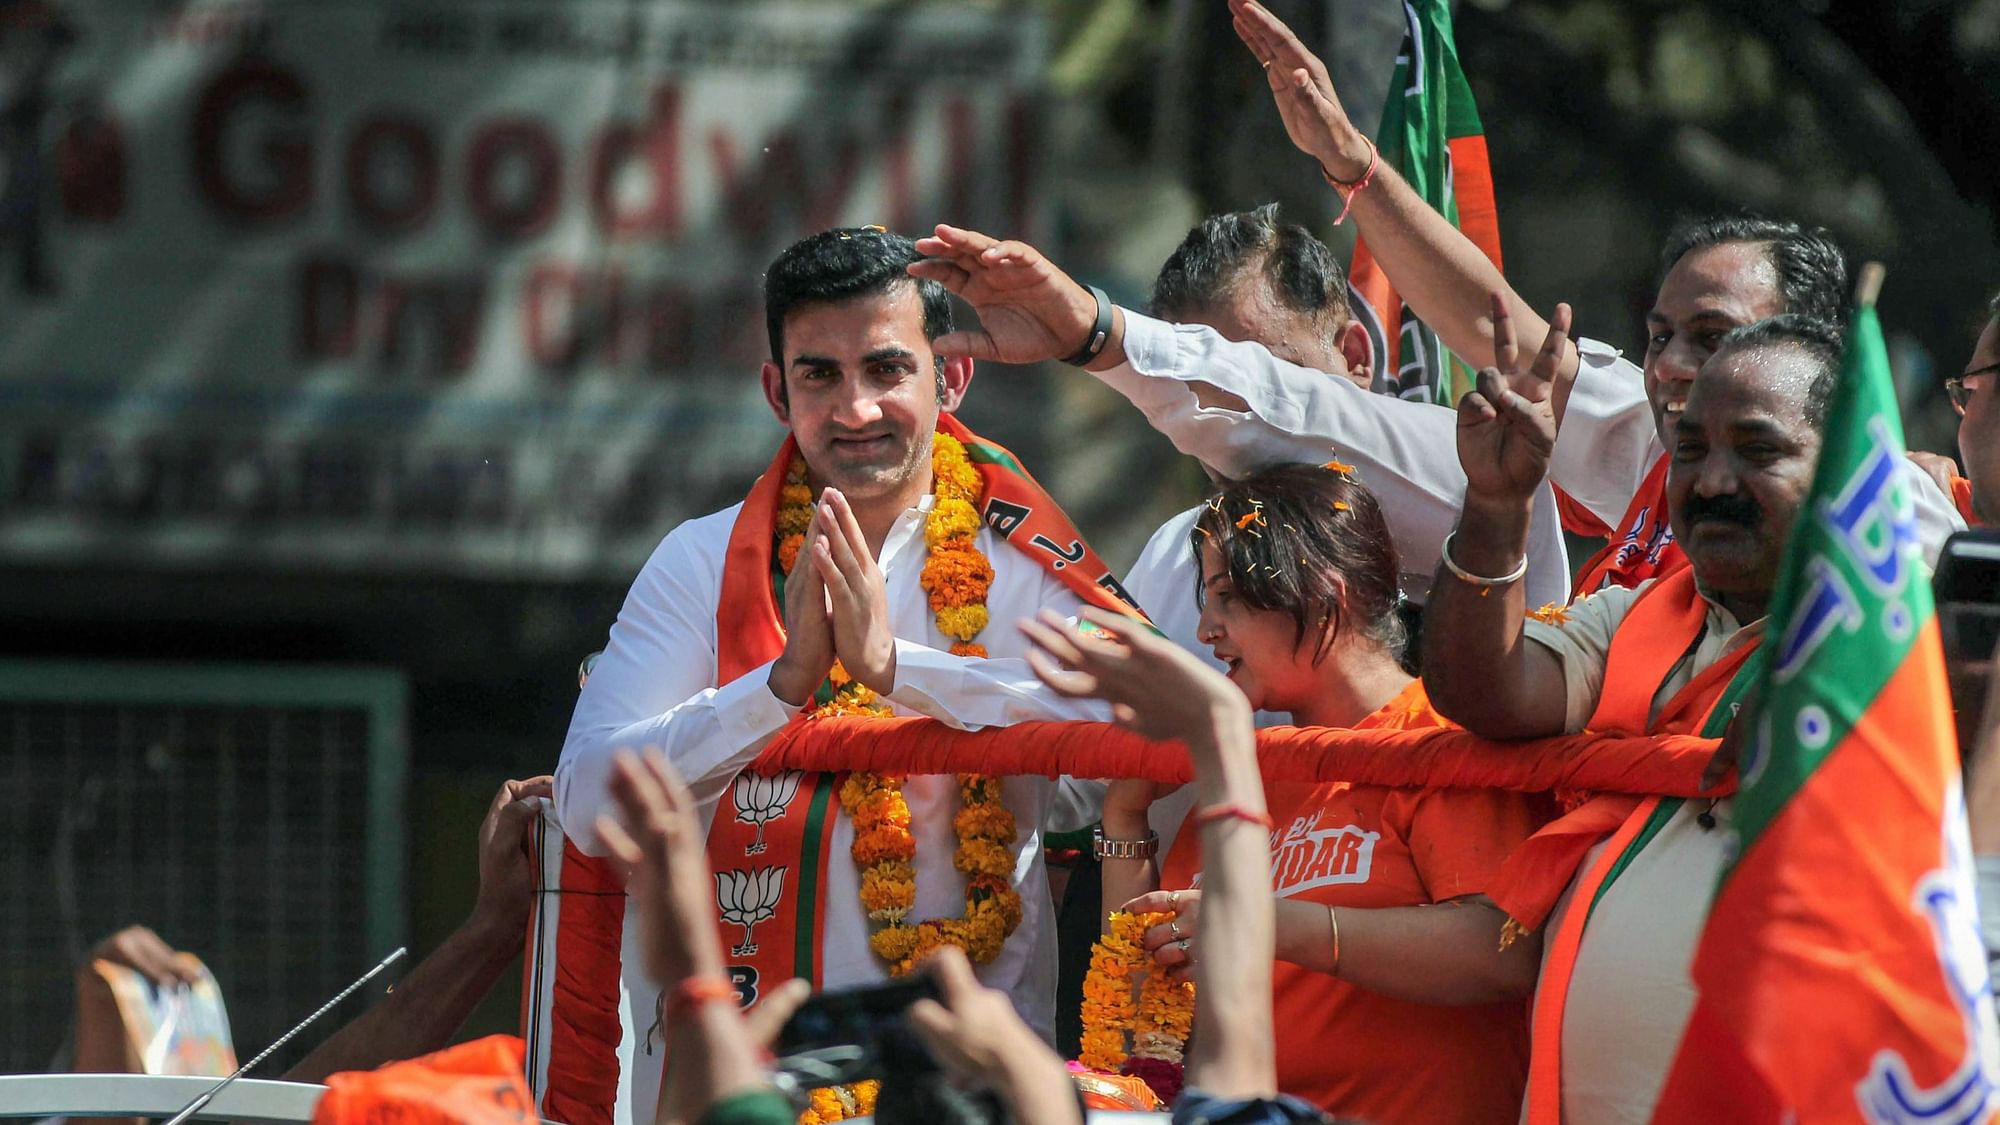 Gautam Gambhir has offered to release rupees 50 lakh  for the equipment to treat coronavirus patients in Delhi government hospitals.